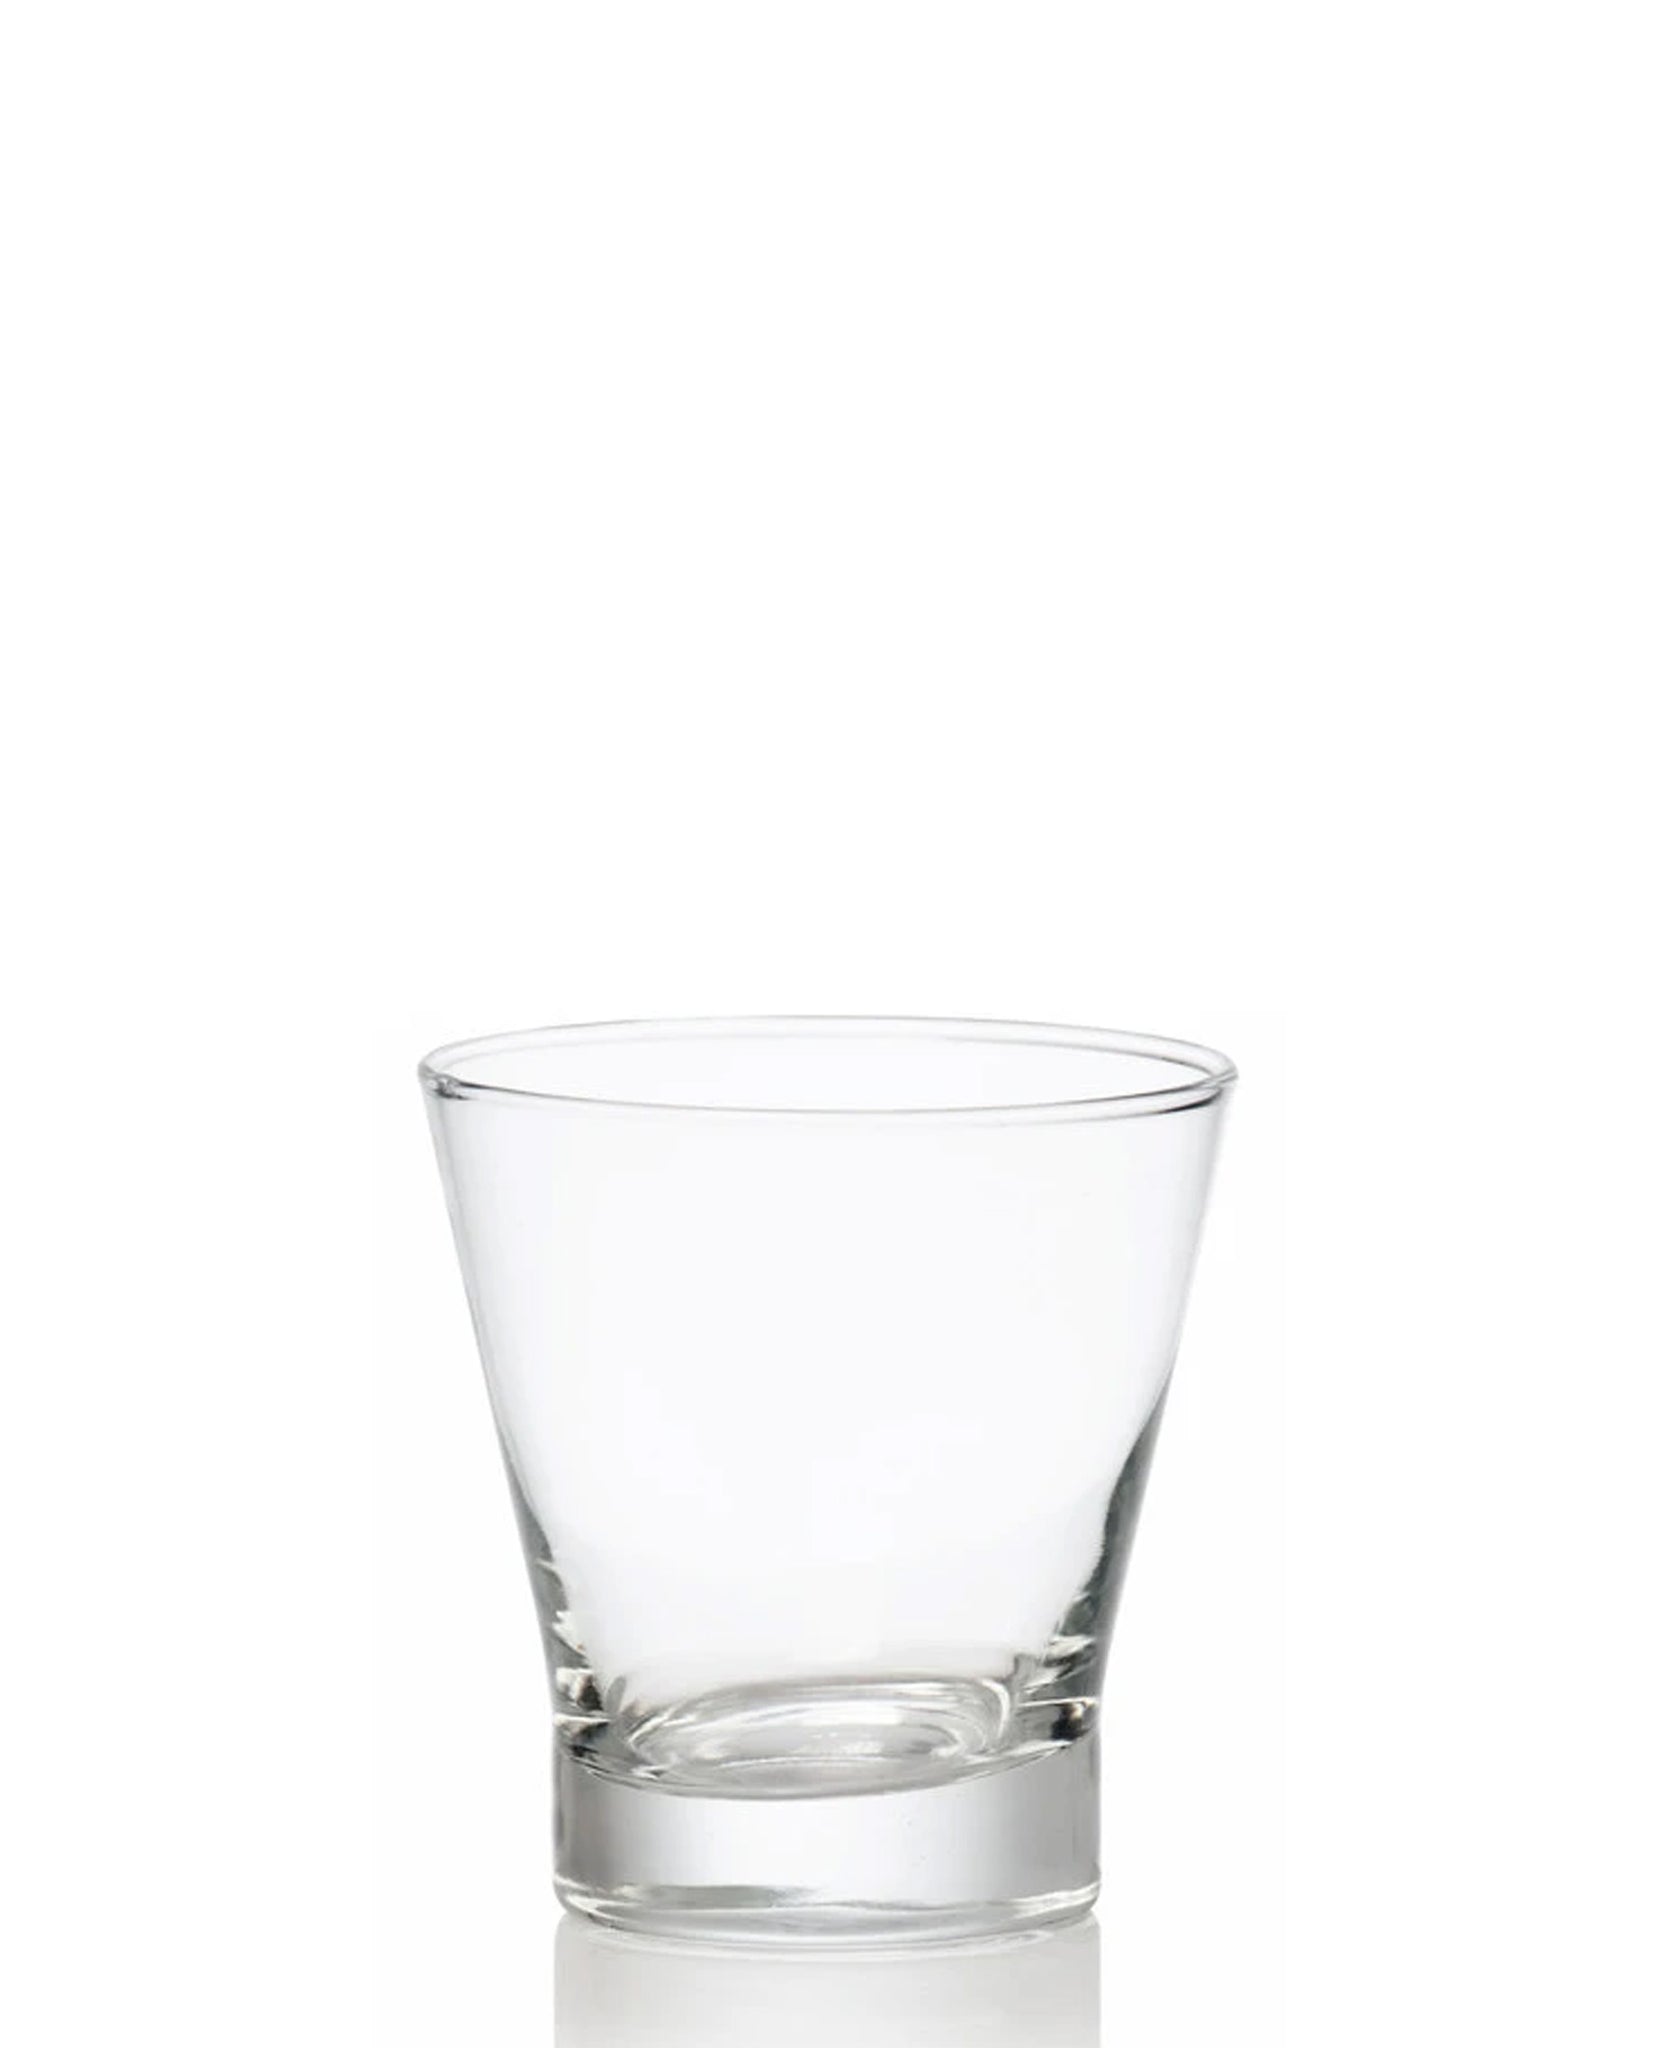 Consol Seville 350ml Whiskey Glasses Set Of 4 - Clear